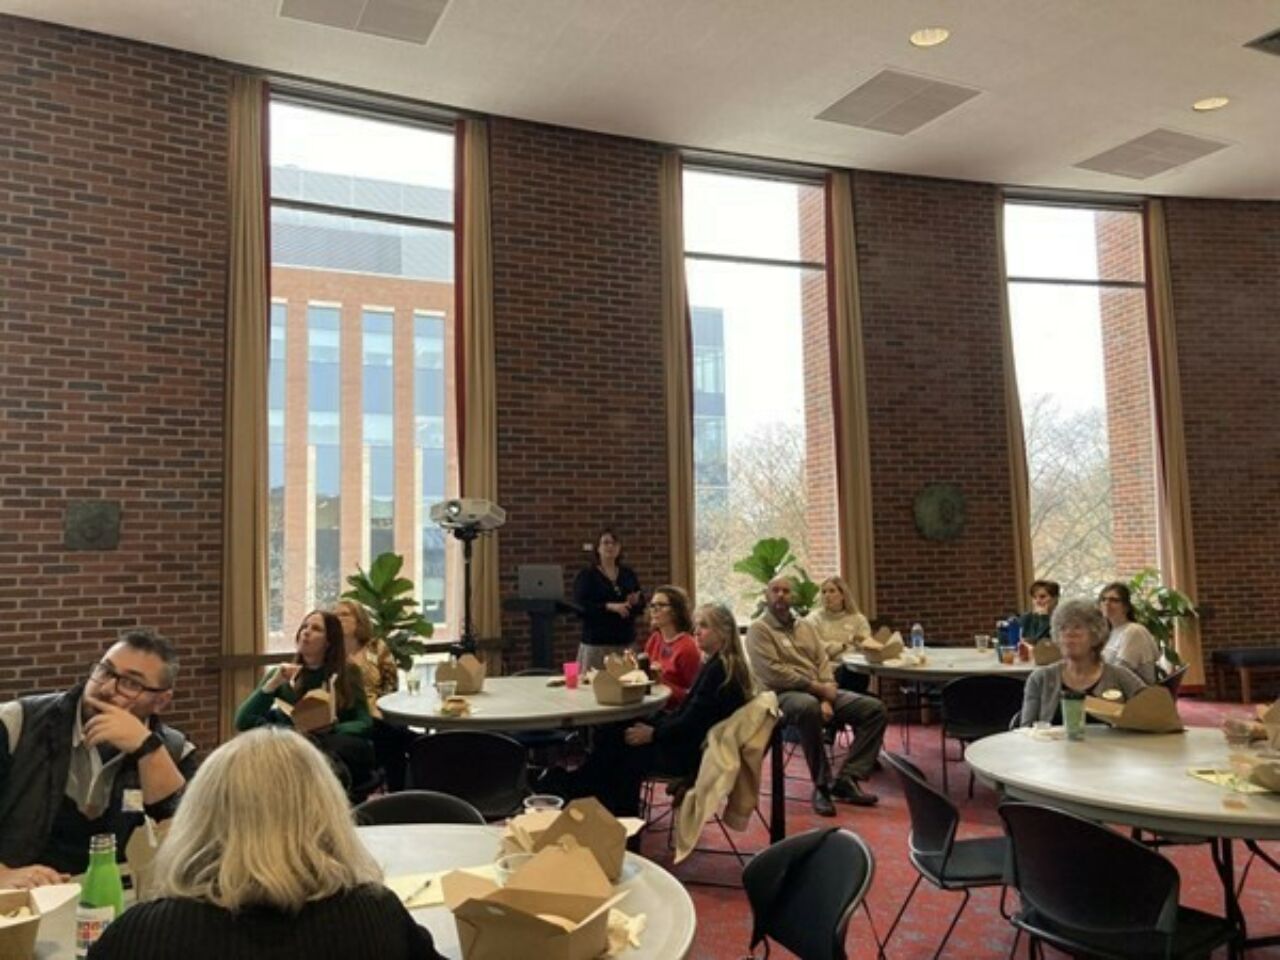 people seated a circular tables with box lunches in a room with brick walls, floor-to-ceiling windows, and red carpet.